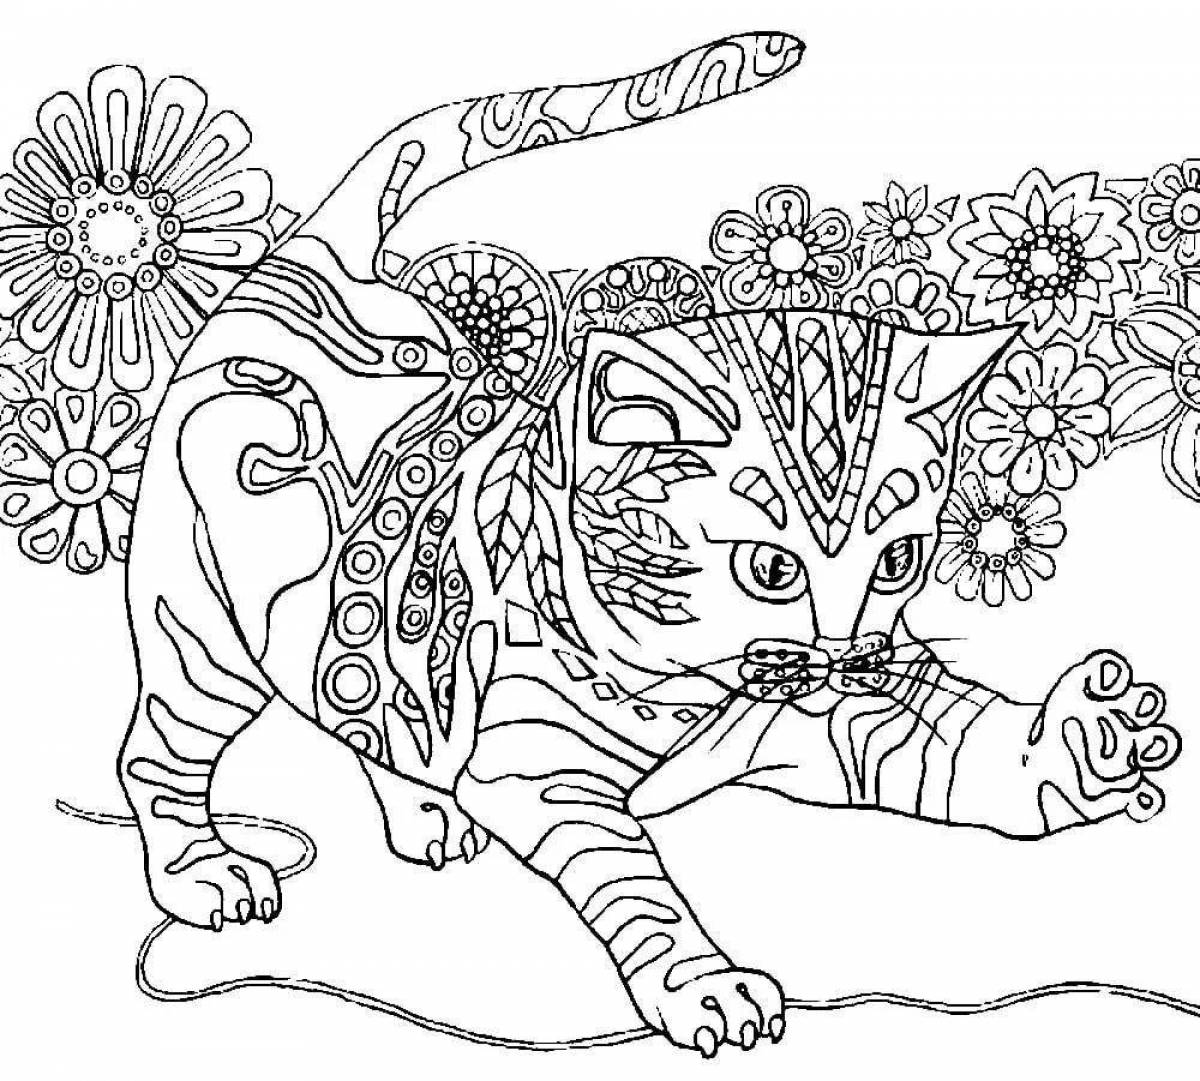 Adorable animal coloring book for kids aged 12+